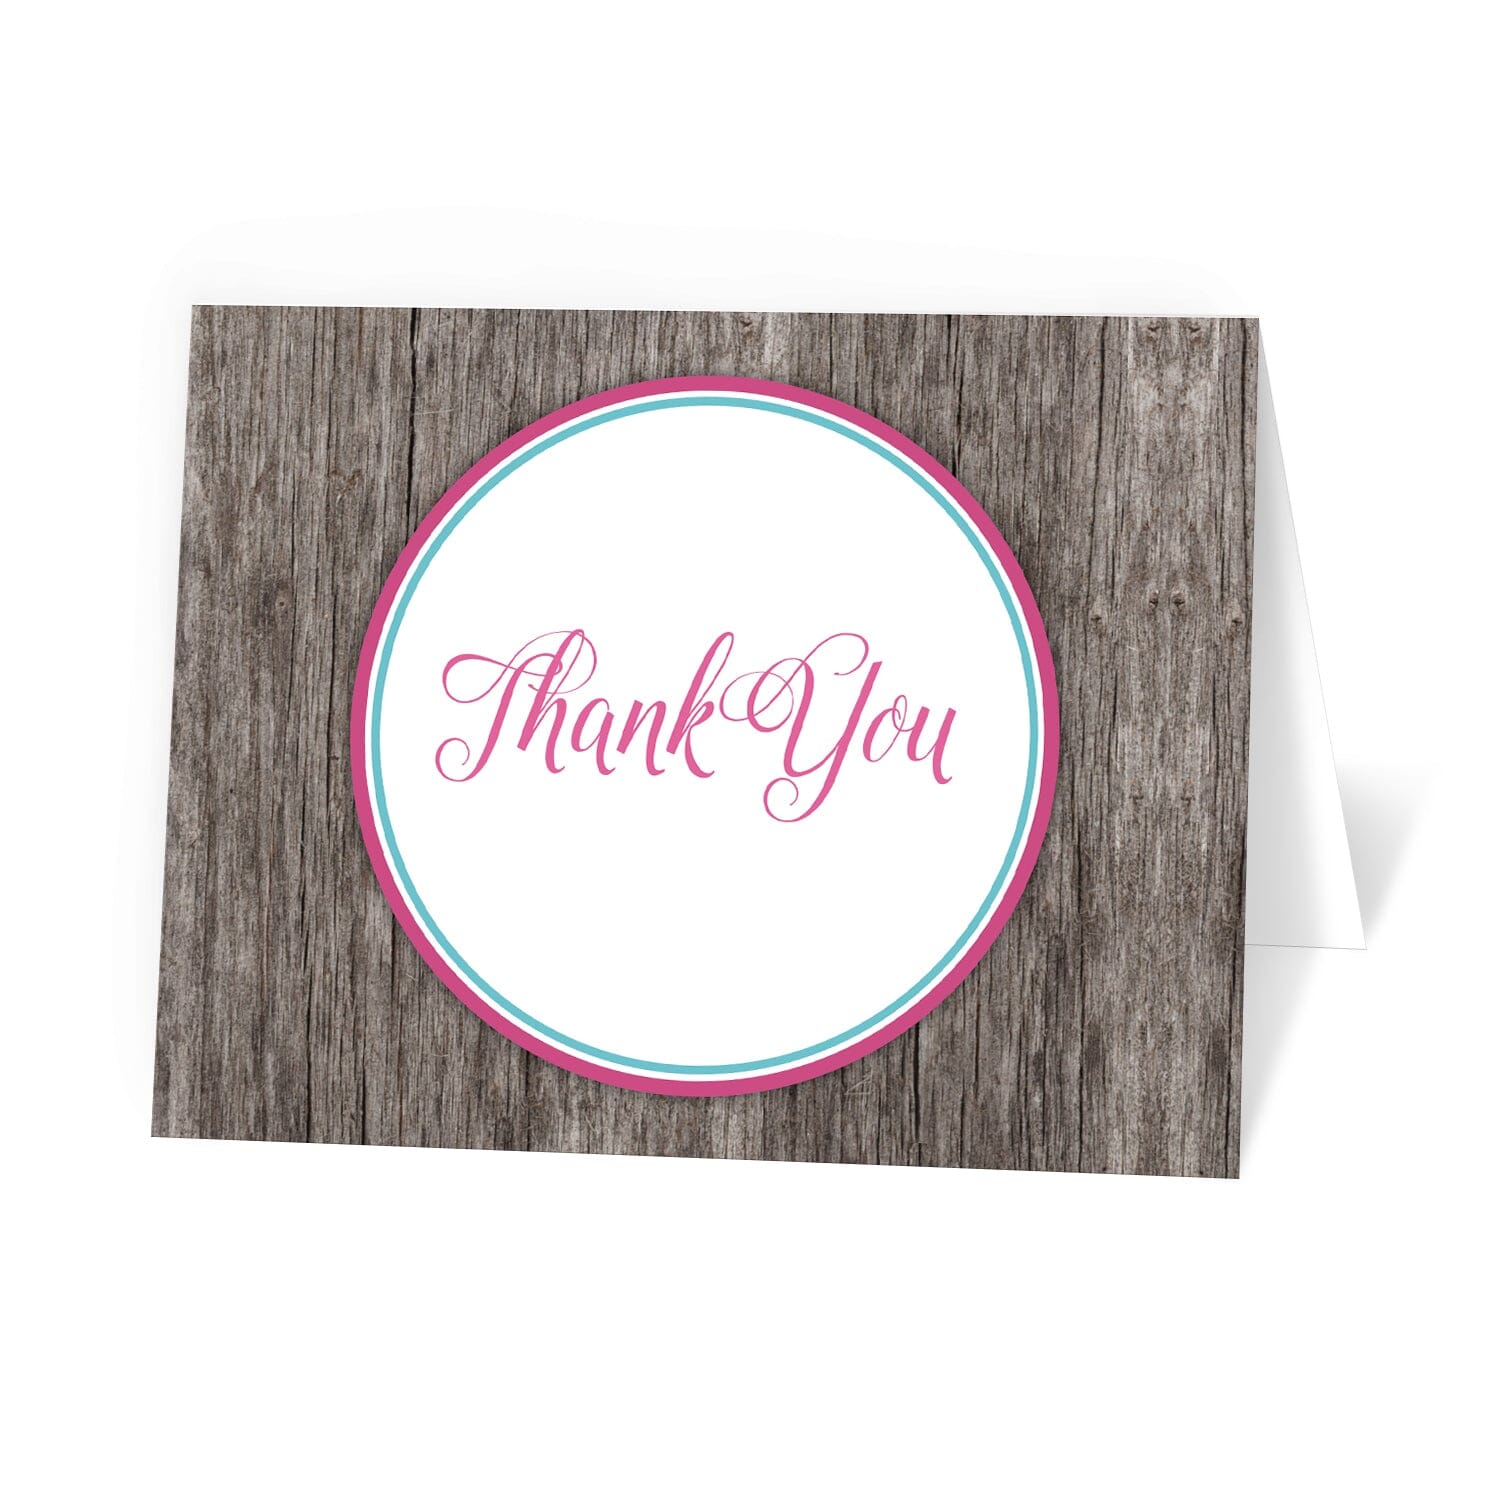 150+ Printable Thank You Cards - FREE